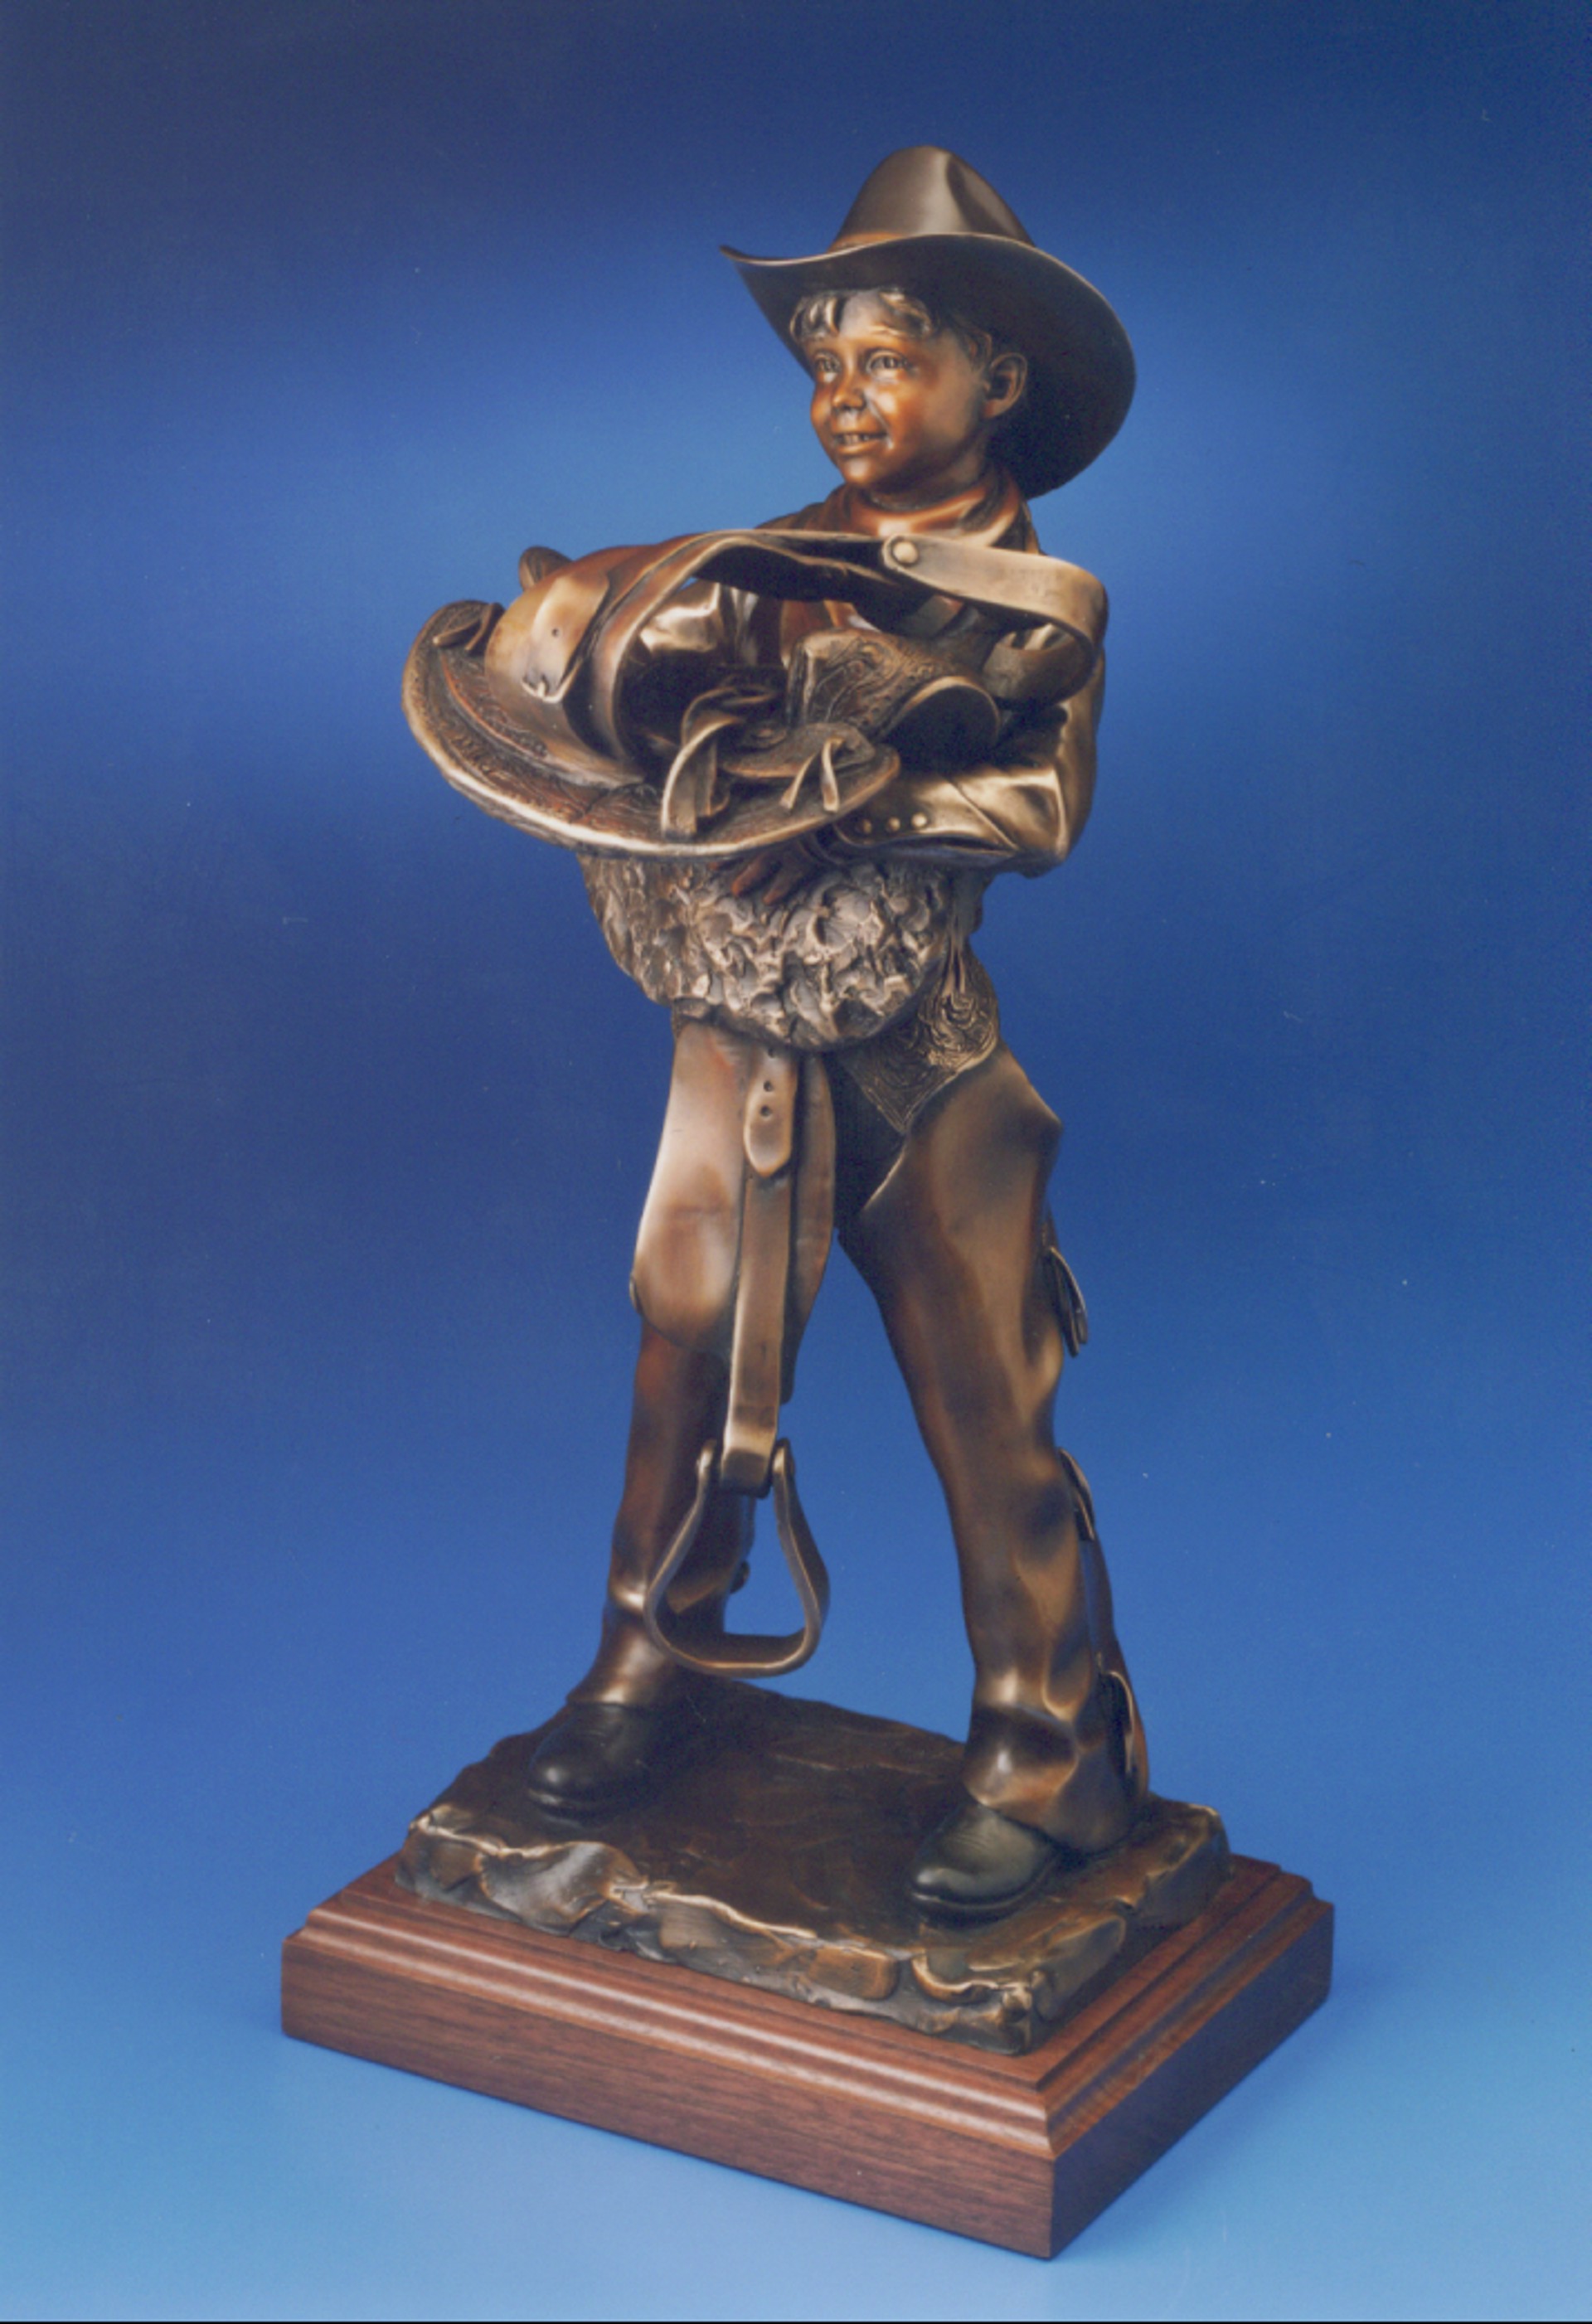 Rarin to Ride by George Lundeen